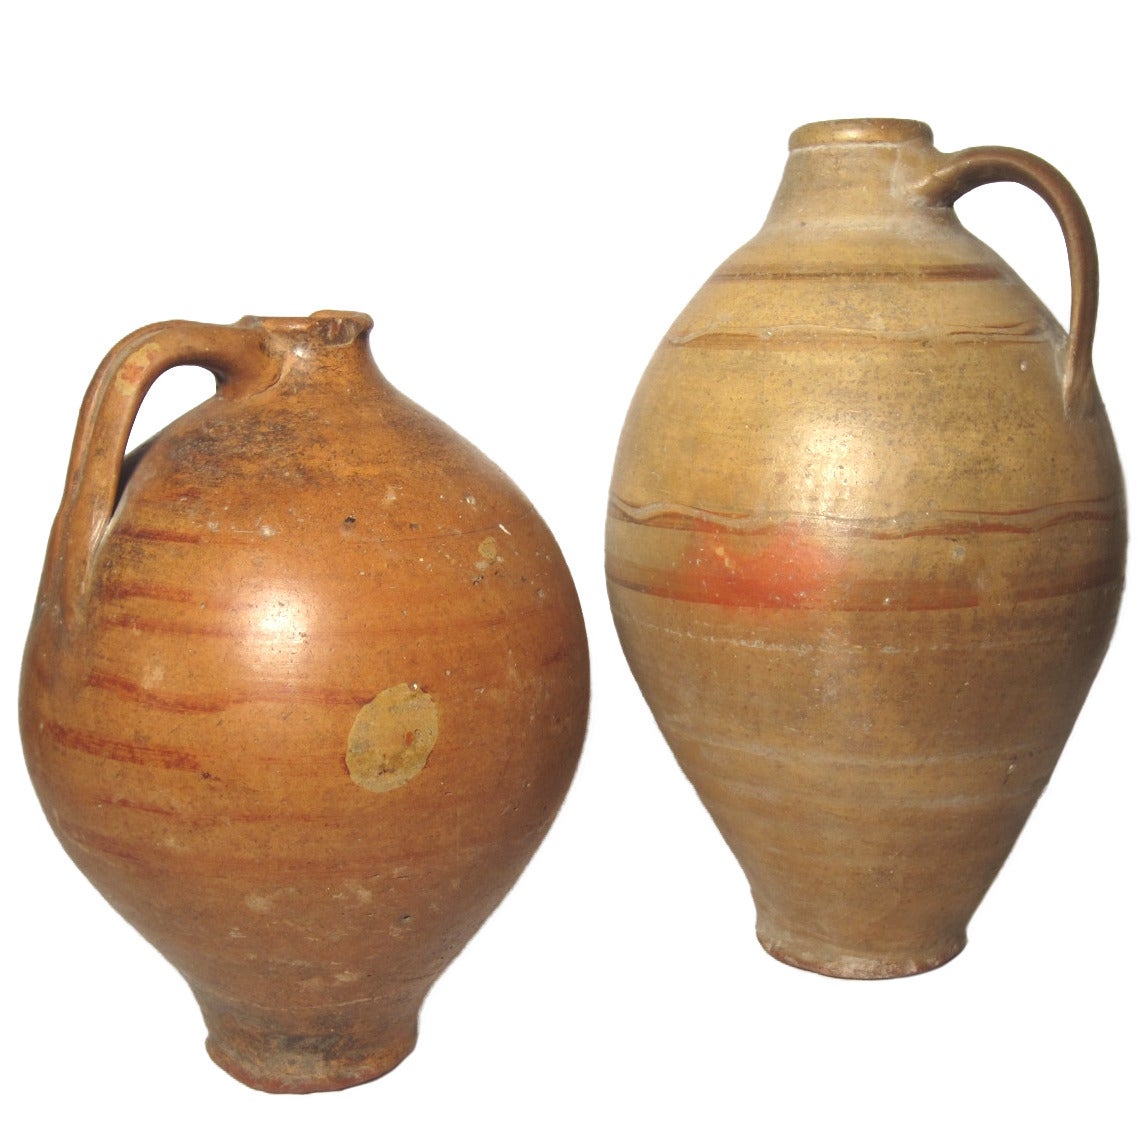 Ancient Roman Polished Terracotta Clay Oil Jars Art Pottery